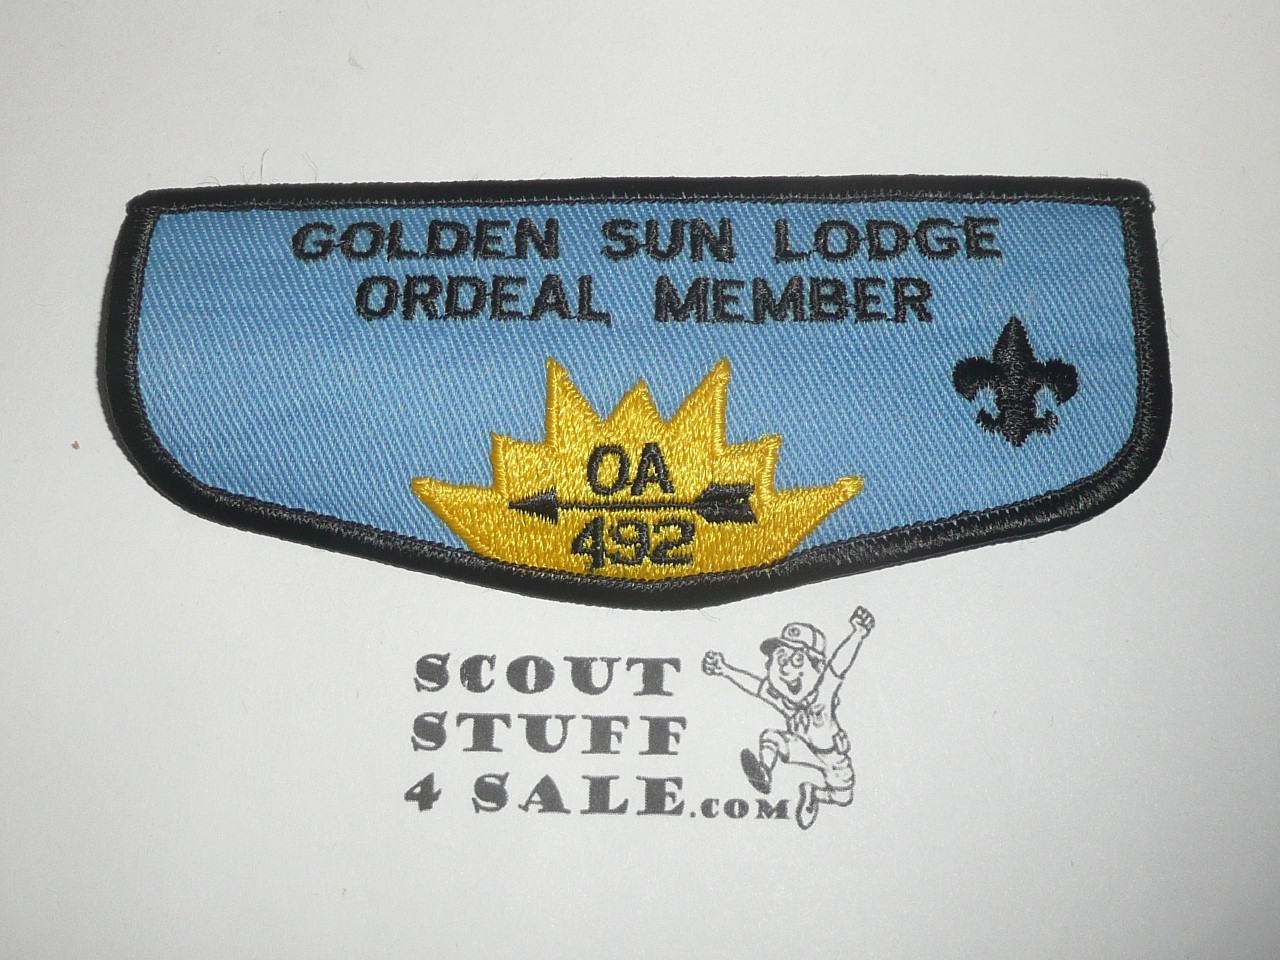 Order of the Arrow Lodge #492 Golden Sun f3 Flap Patch